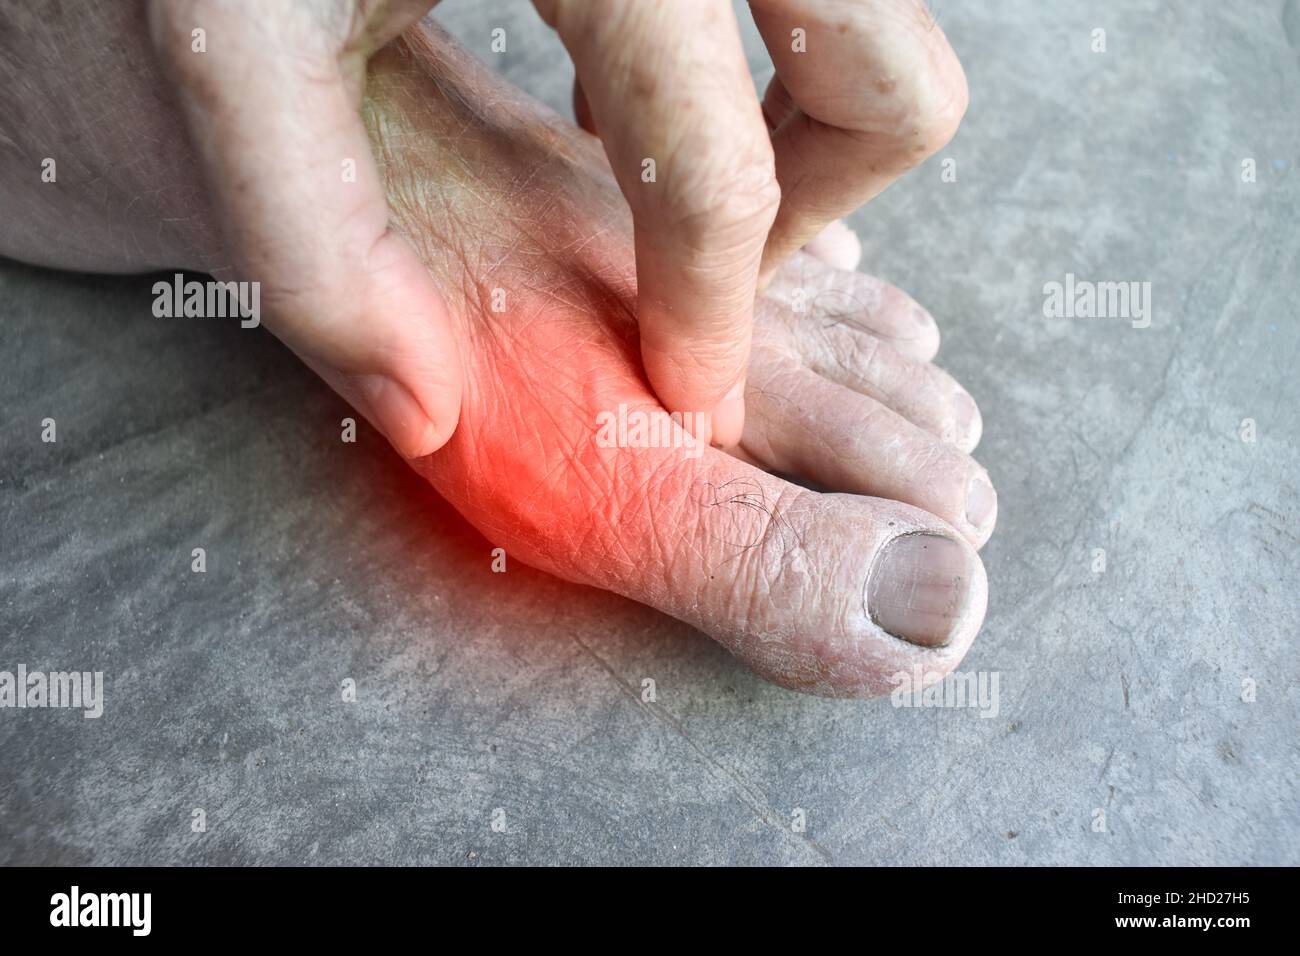 Inflammation of Asian old man’s foot. Concept of foot joint pain, arthritis, stumble, hyperuricema or gout. Stock Photo